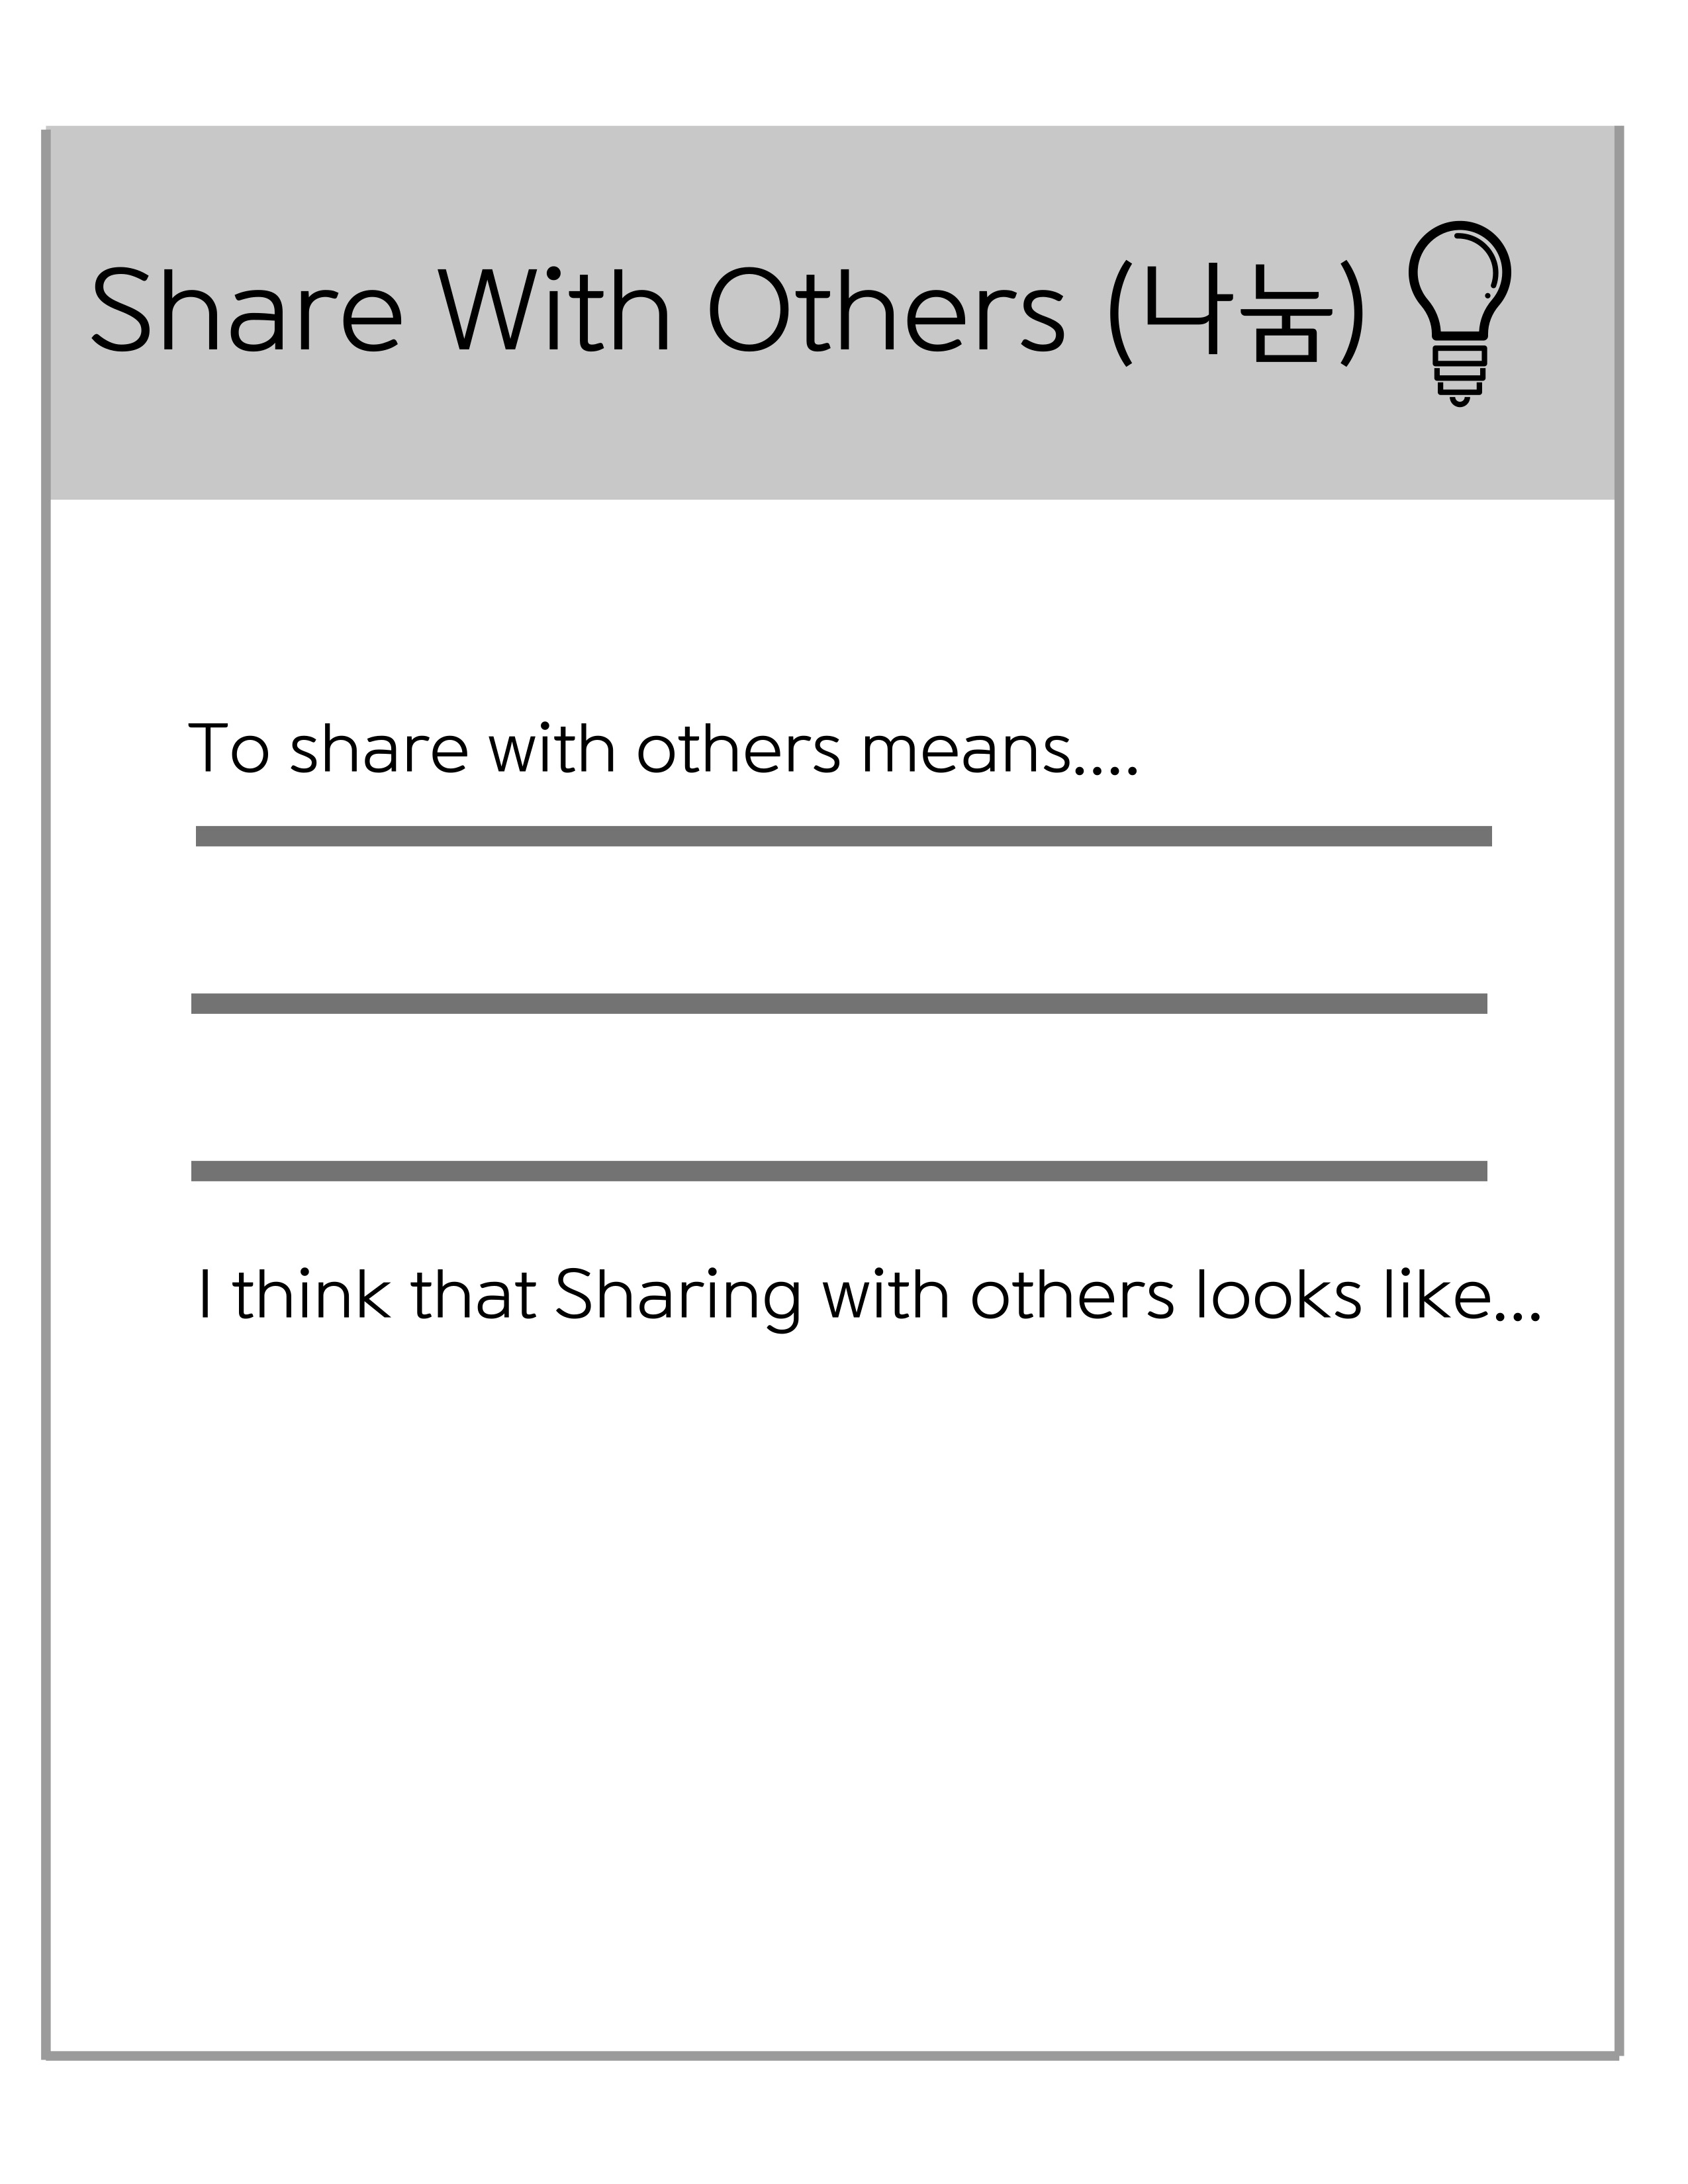 3. What is Sharing with others_.jpg